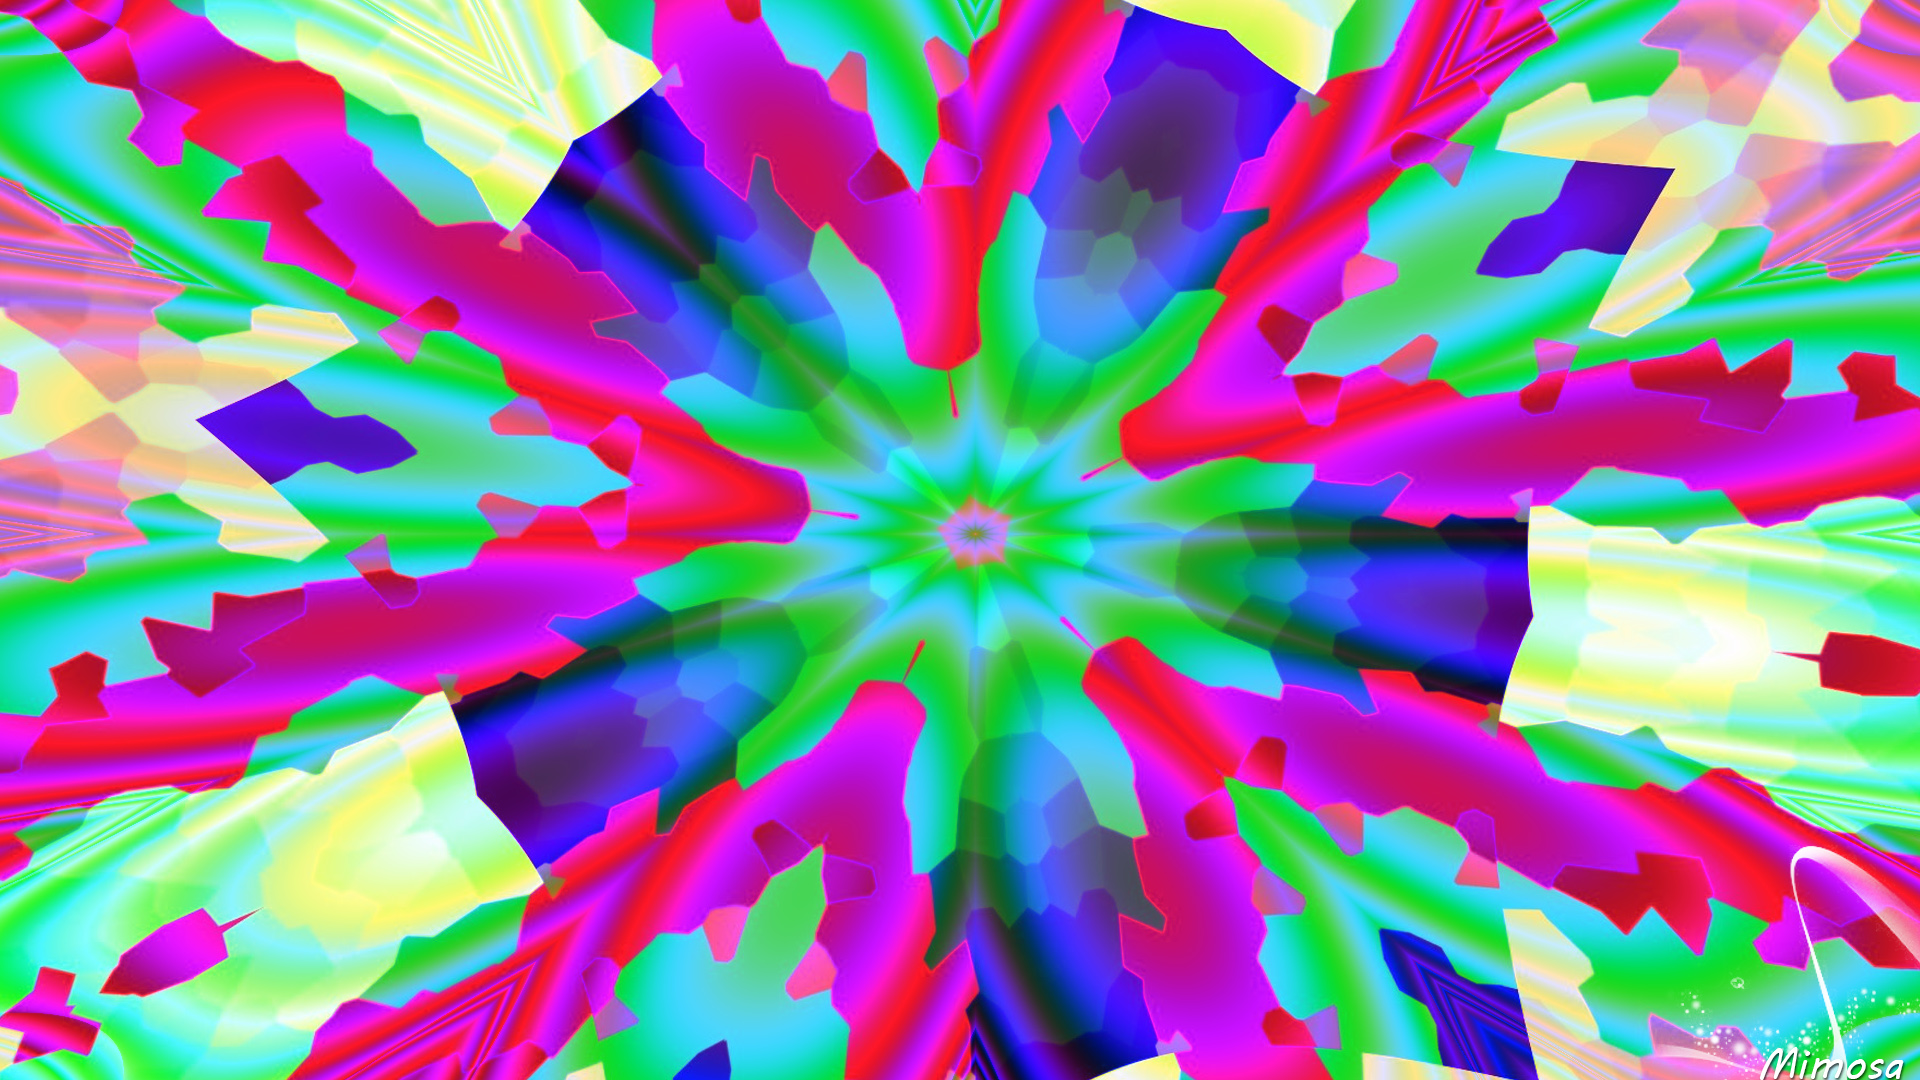 Abstract Artistic Colorful Colors Digital Art Kaleidoscope 1920x1080